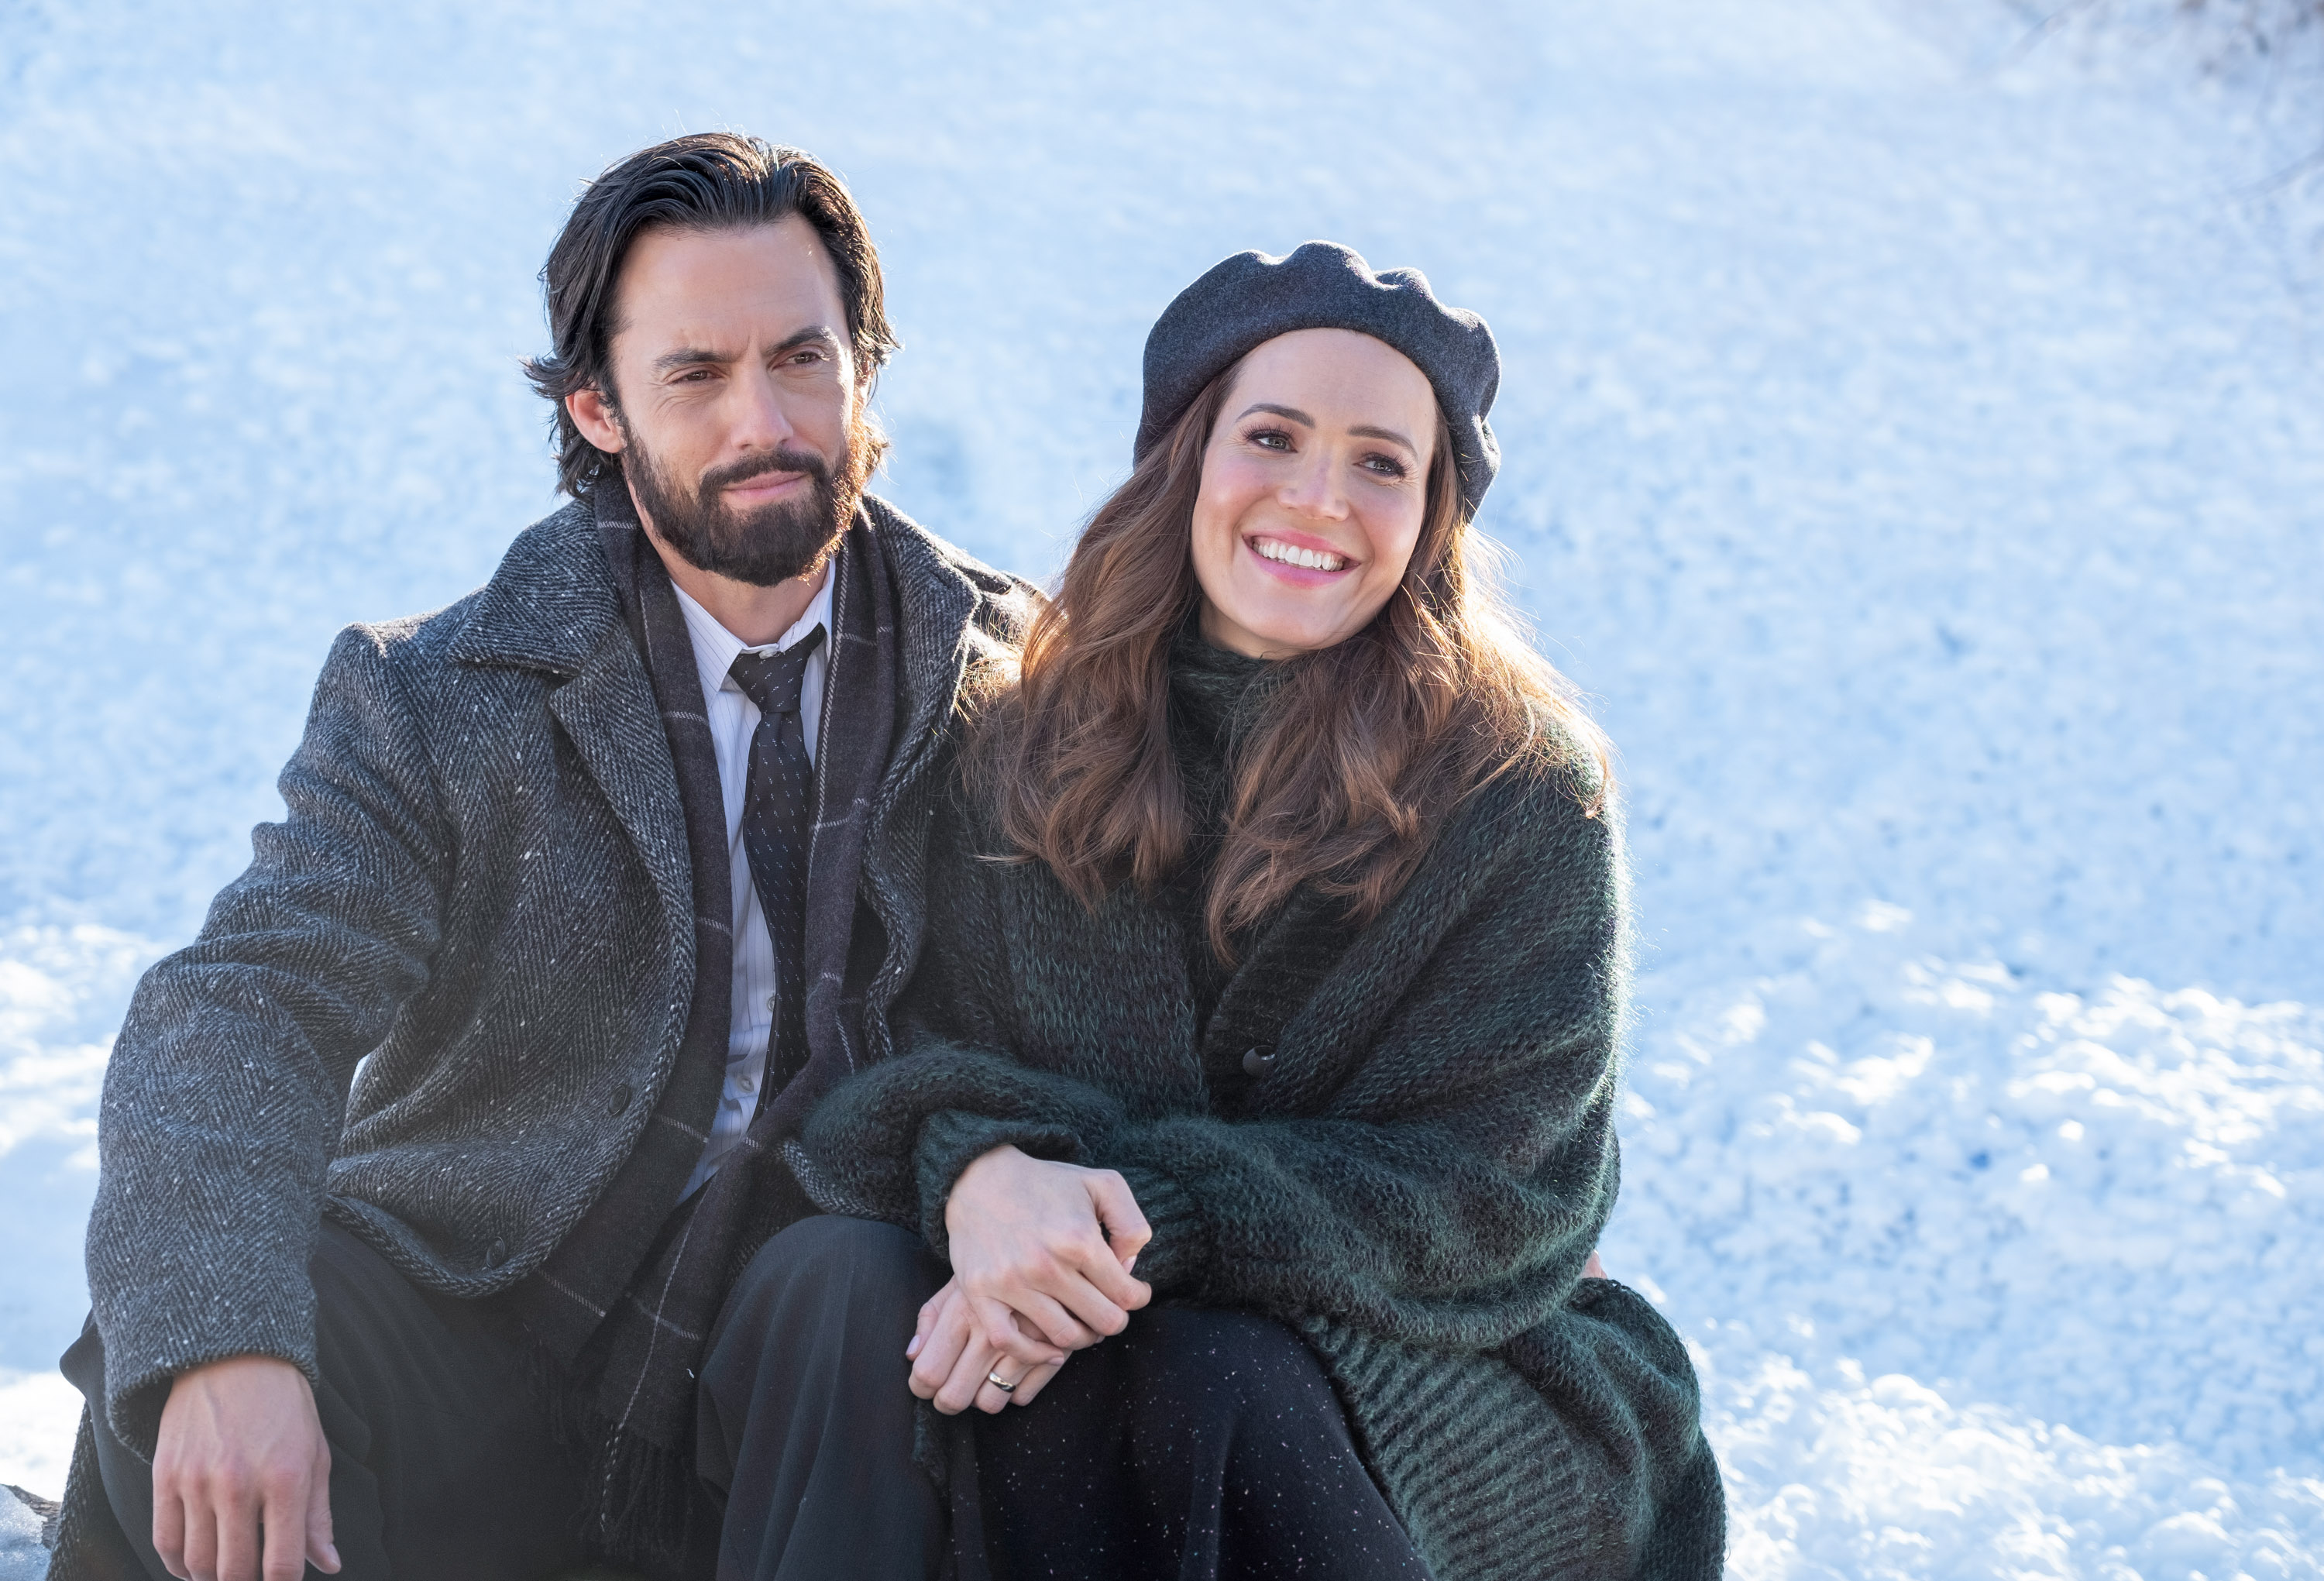 Milo Ventimiglia and Mandy Moore, in character as Jack and Rebecca in 'This Is Us' Season 6 Episode 4, share a scene. Jack wears a gray coat over a white button-up shirt, black tie, and black pants. Rebecca wears a oversized gray sweater, a long black skirt, and a black hat.